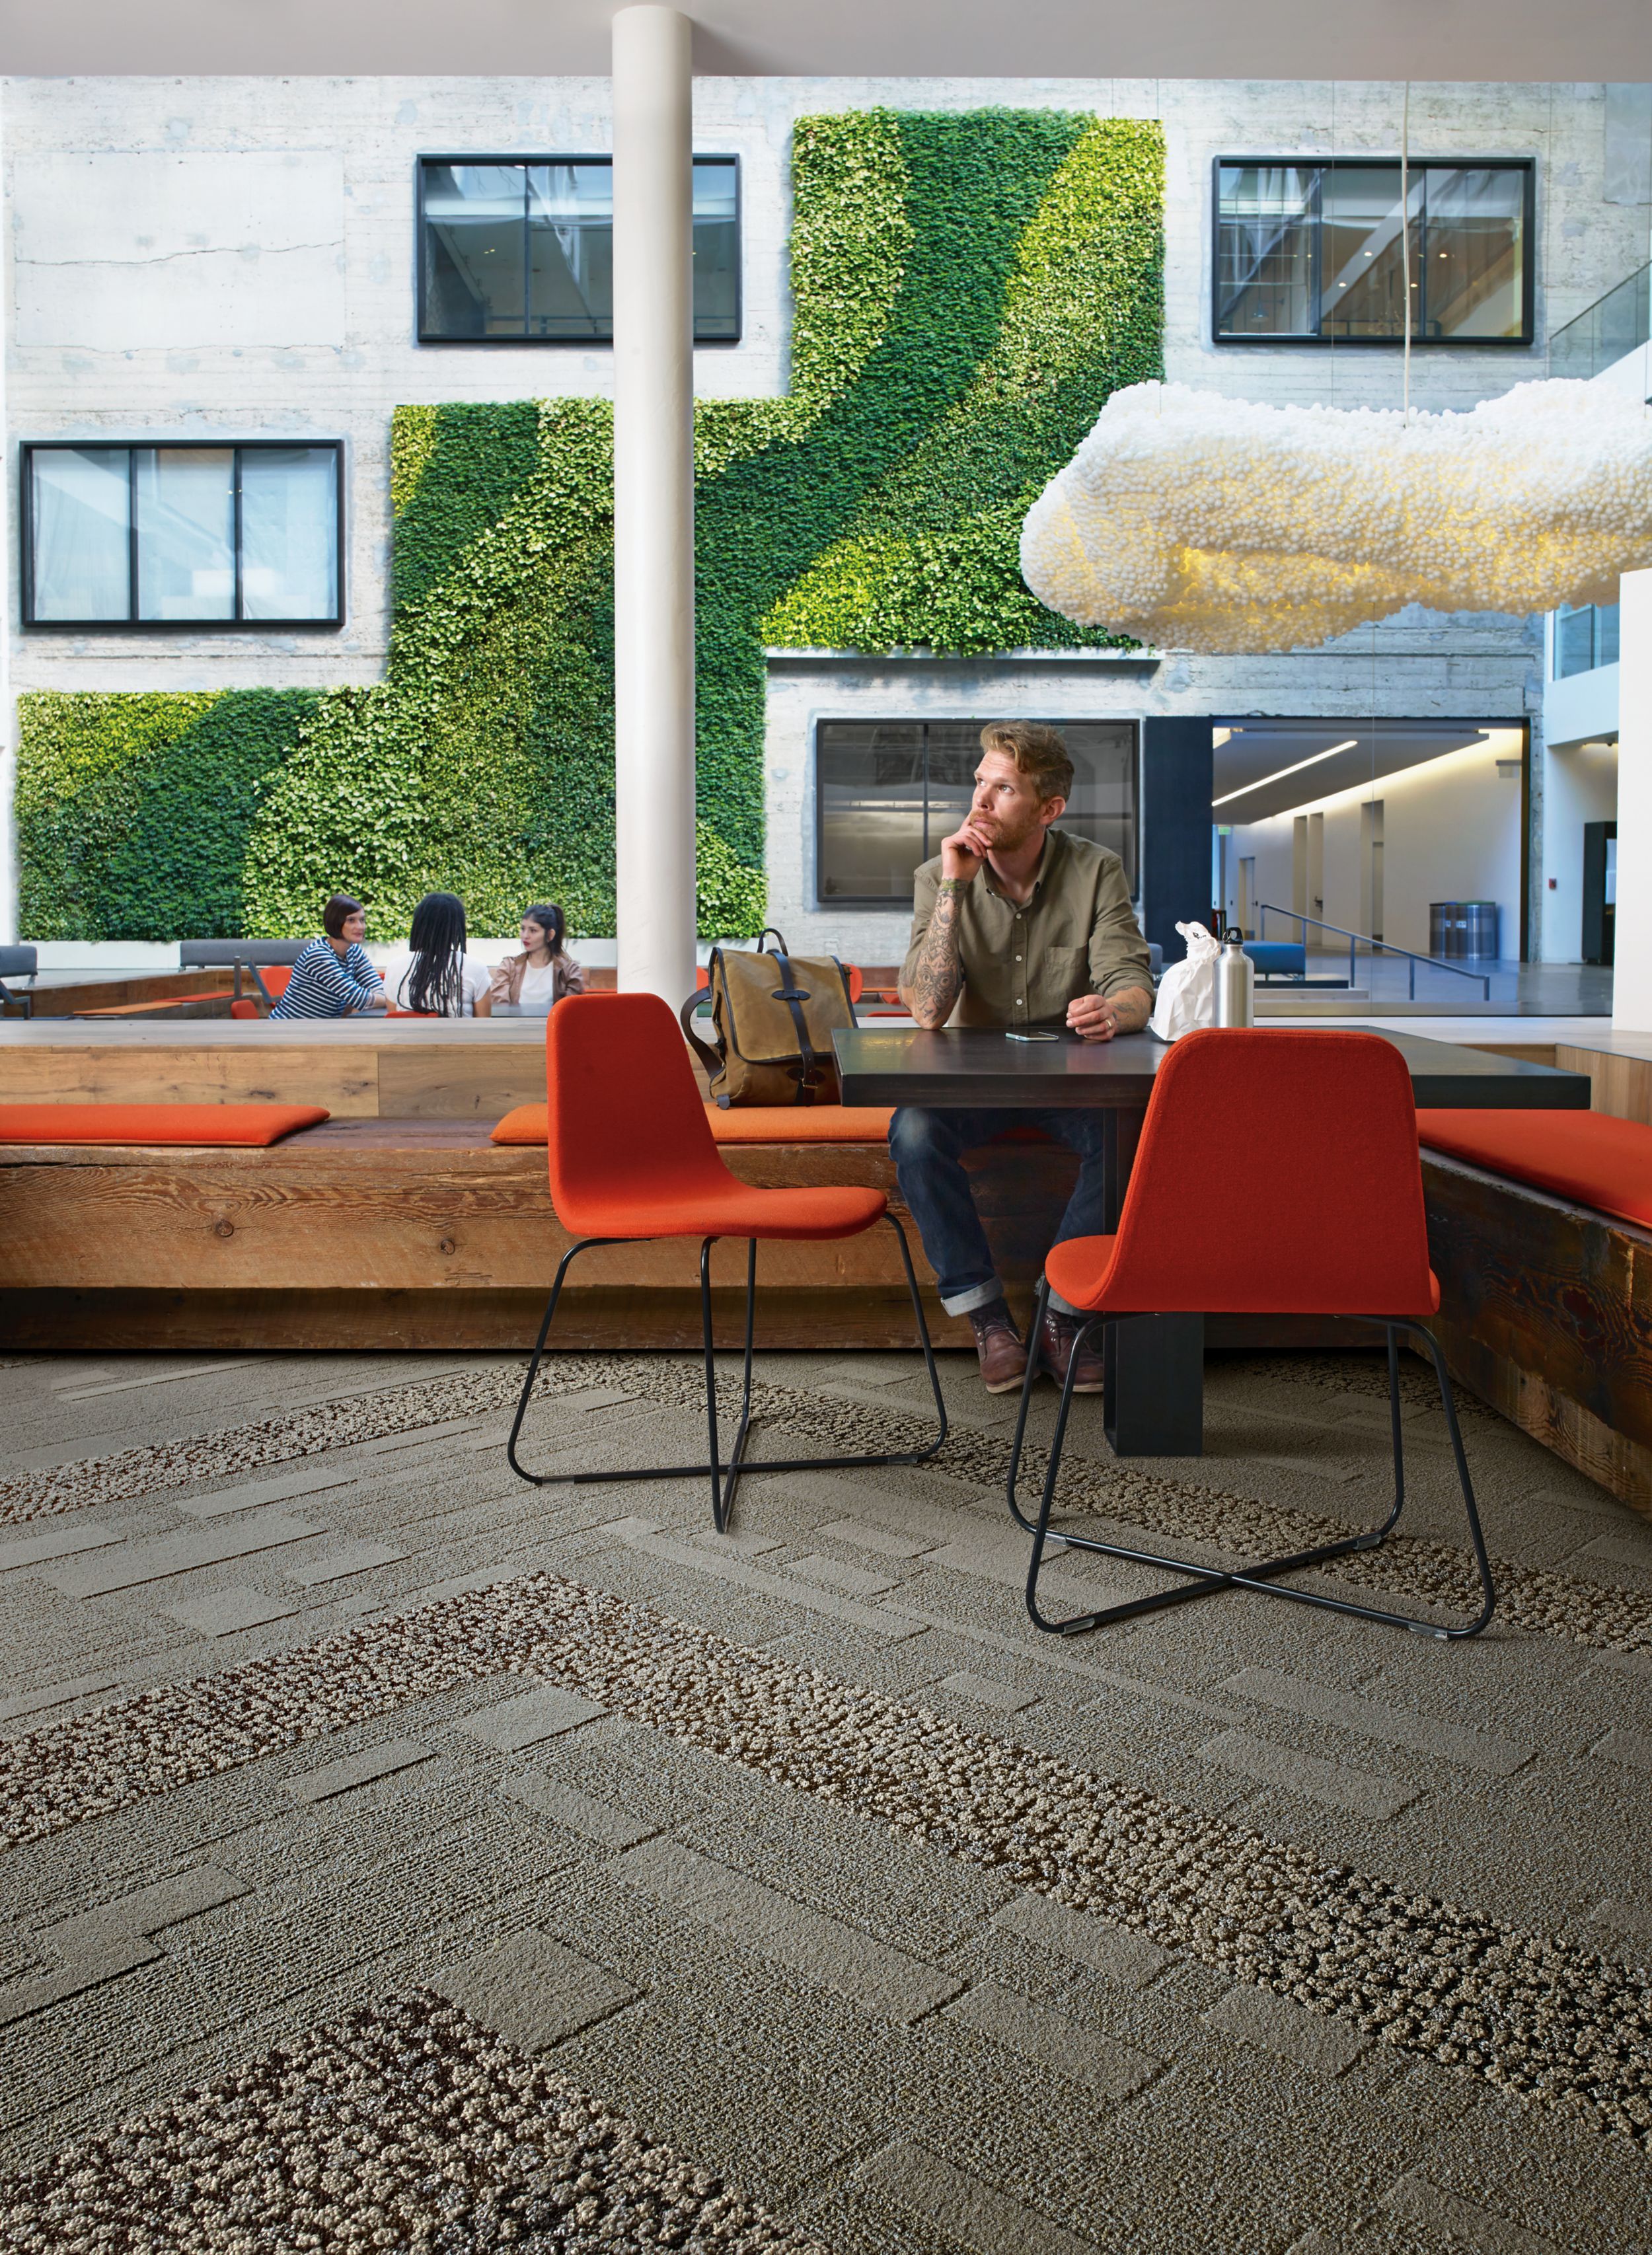 Interface EM552 plank carpet tile with man sitting at table with lunch and group meeting in front of vine wall in the background  numéro d’image 3